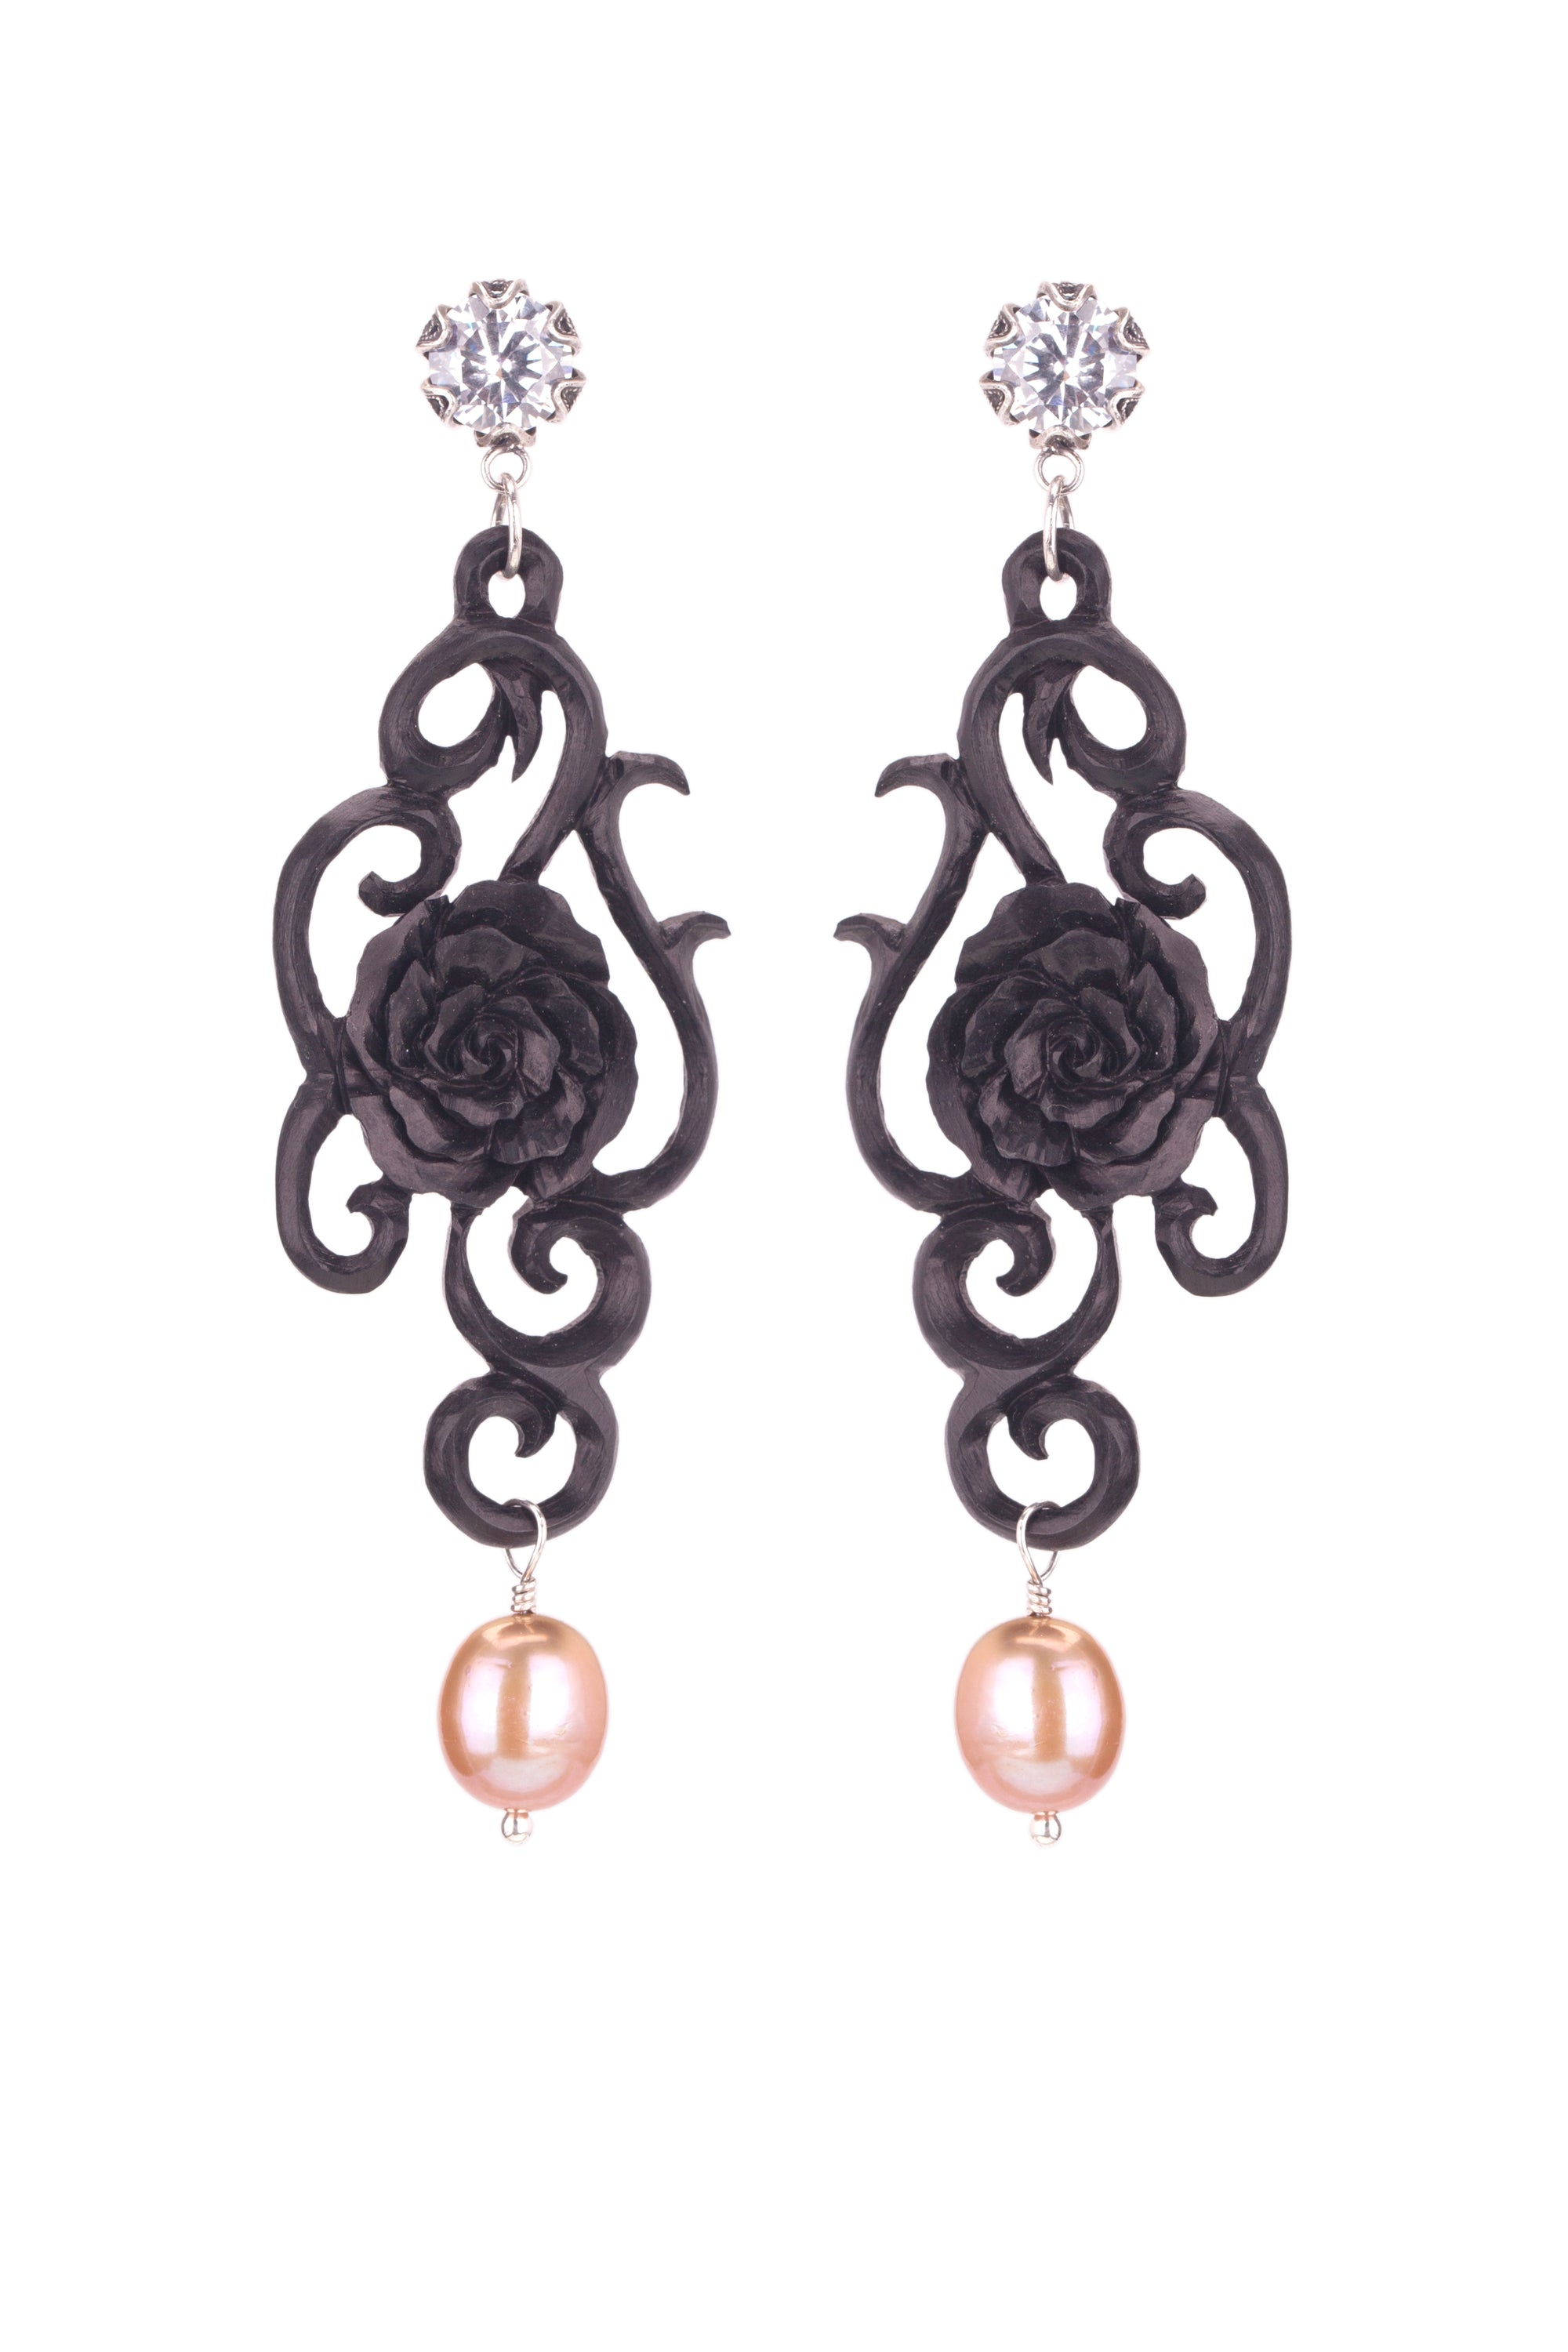 Carved Rose Earrings - White CZ/Cream Pearl